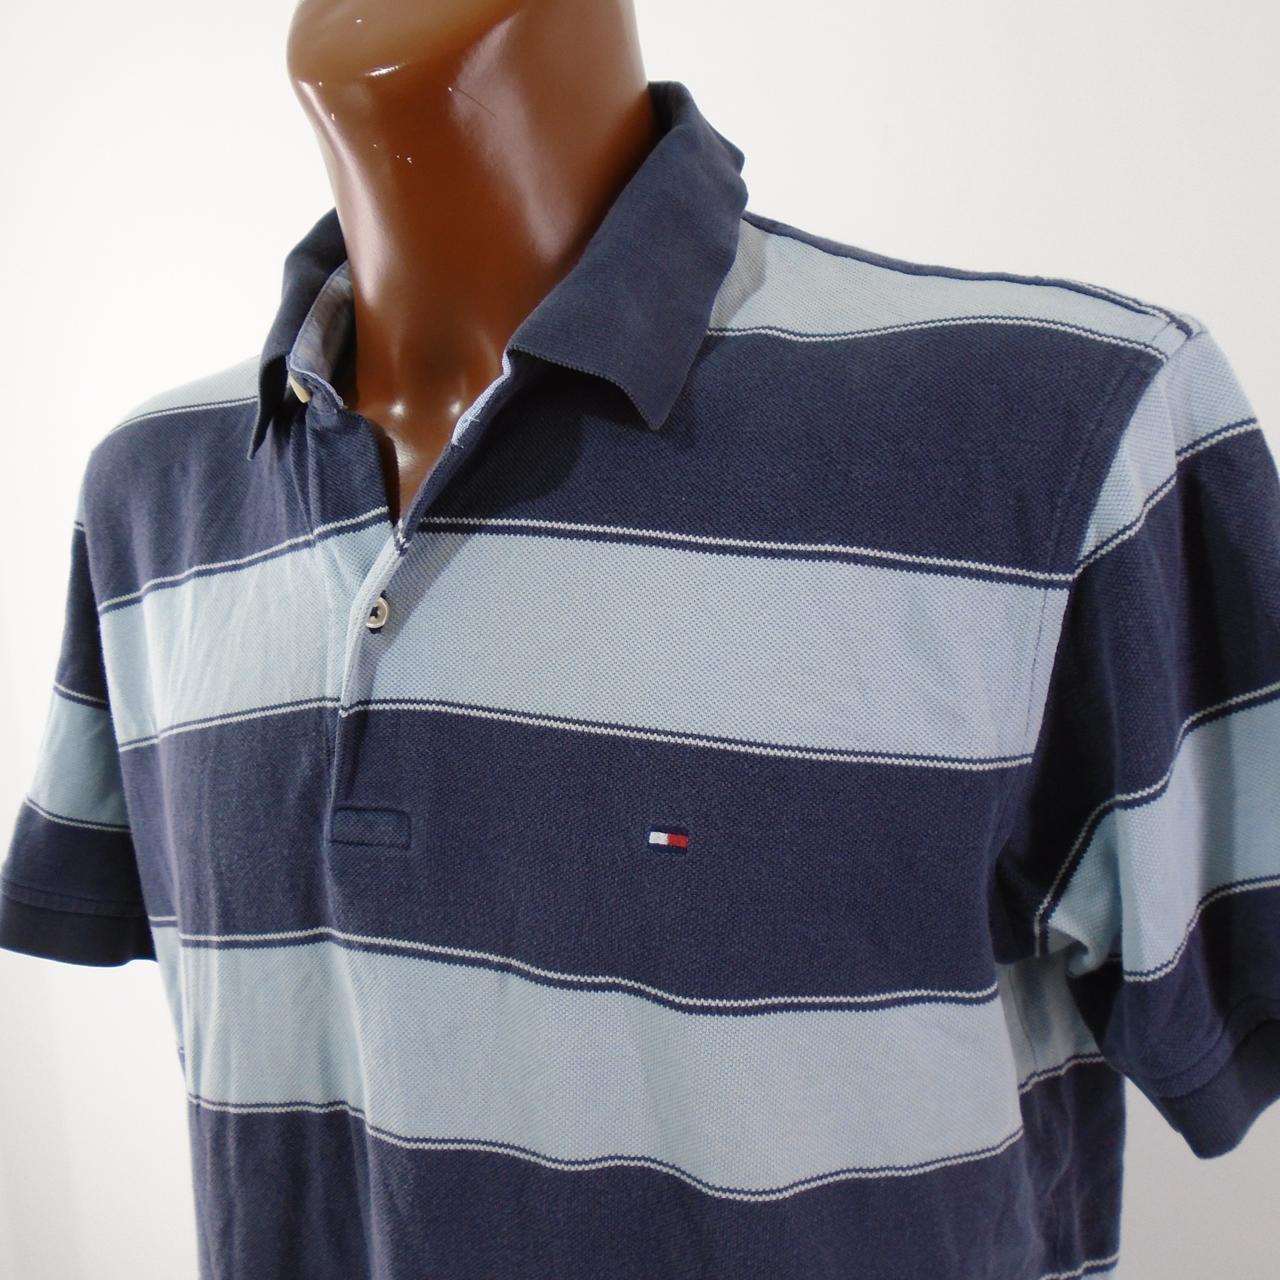 Men's Polo Tommy Hilfiger. Multicolor. L. Used. Good